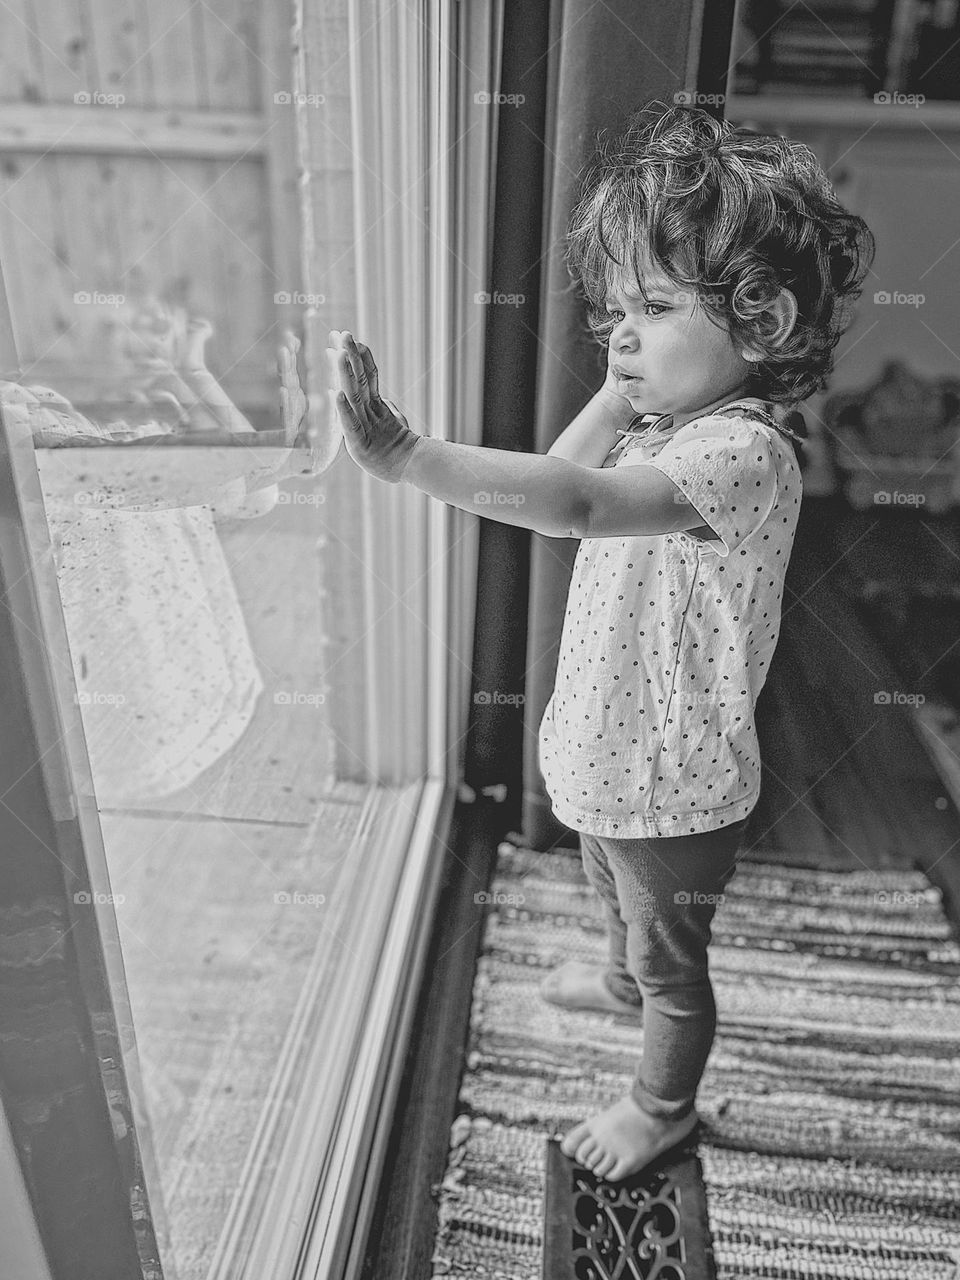 Toddler girl standing at window looking out, monochrome portrait, toddler girl looks thorough glass window, reflection in the window, cute kids in windows, black and white toddler photo, toddler girl looking outside from window